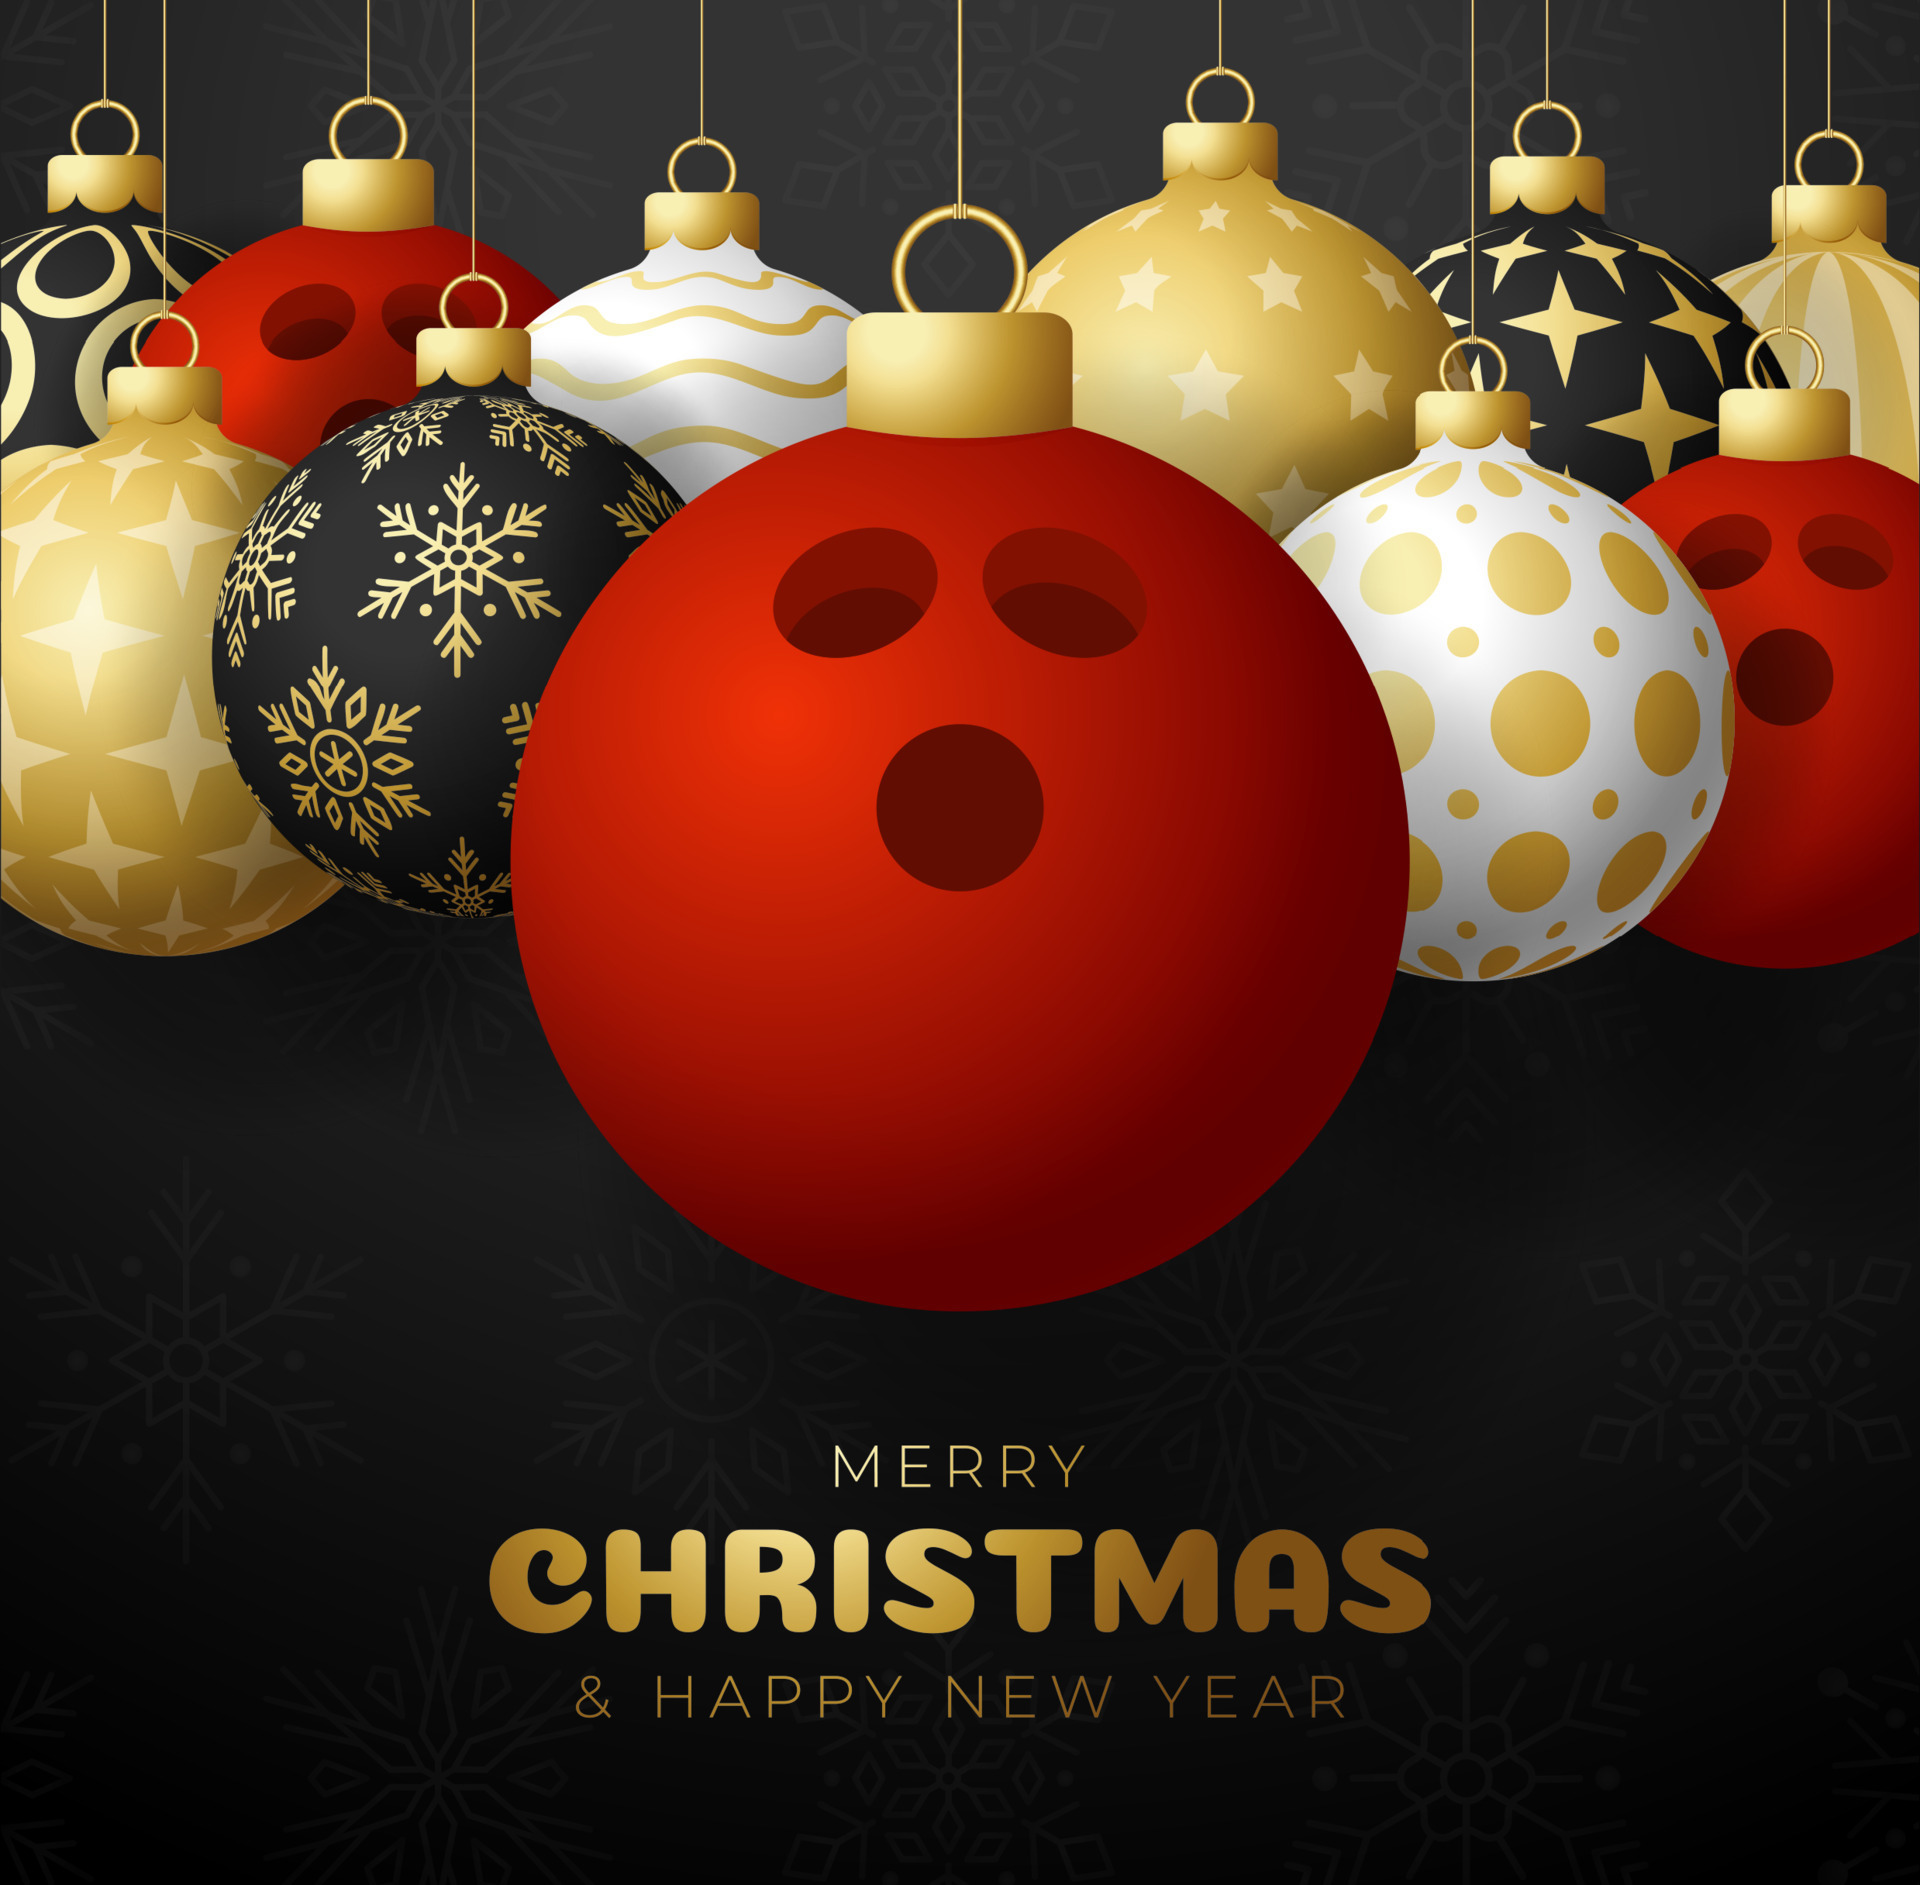 Merry Christmas And Happy New Year Luxury Sports Greeting Card Basketball  Ball As A Christmas Ball On Black Background Vector Illustration Stock  Illustration - Download Image Now - iStock